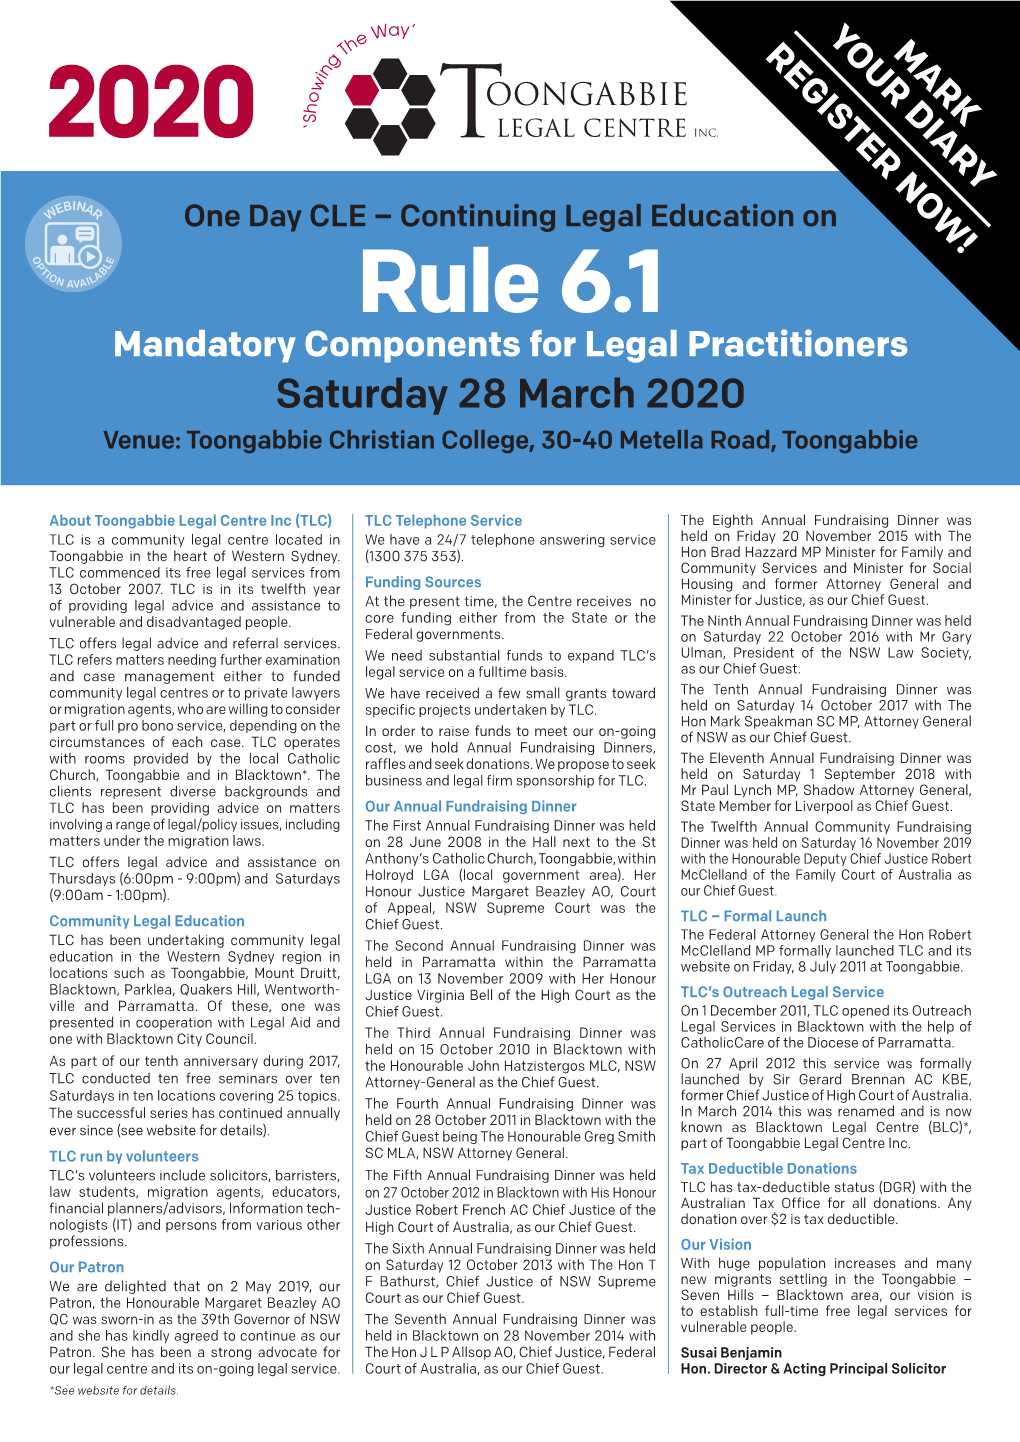 Rule 6.1: Mandatory Components for Legal Practitioners